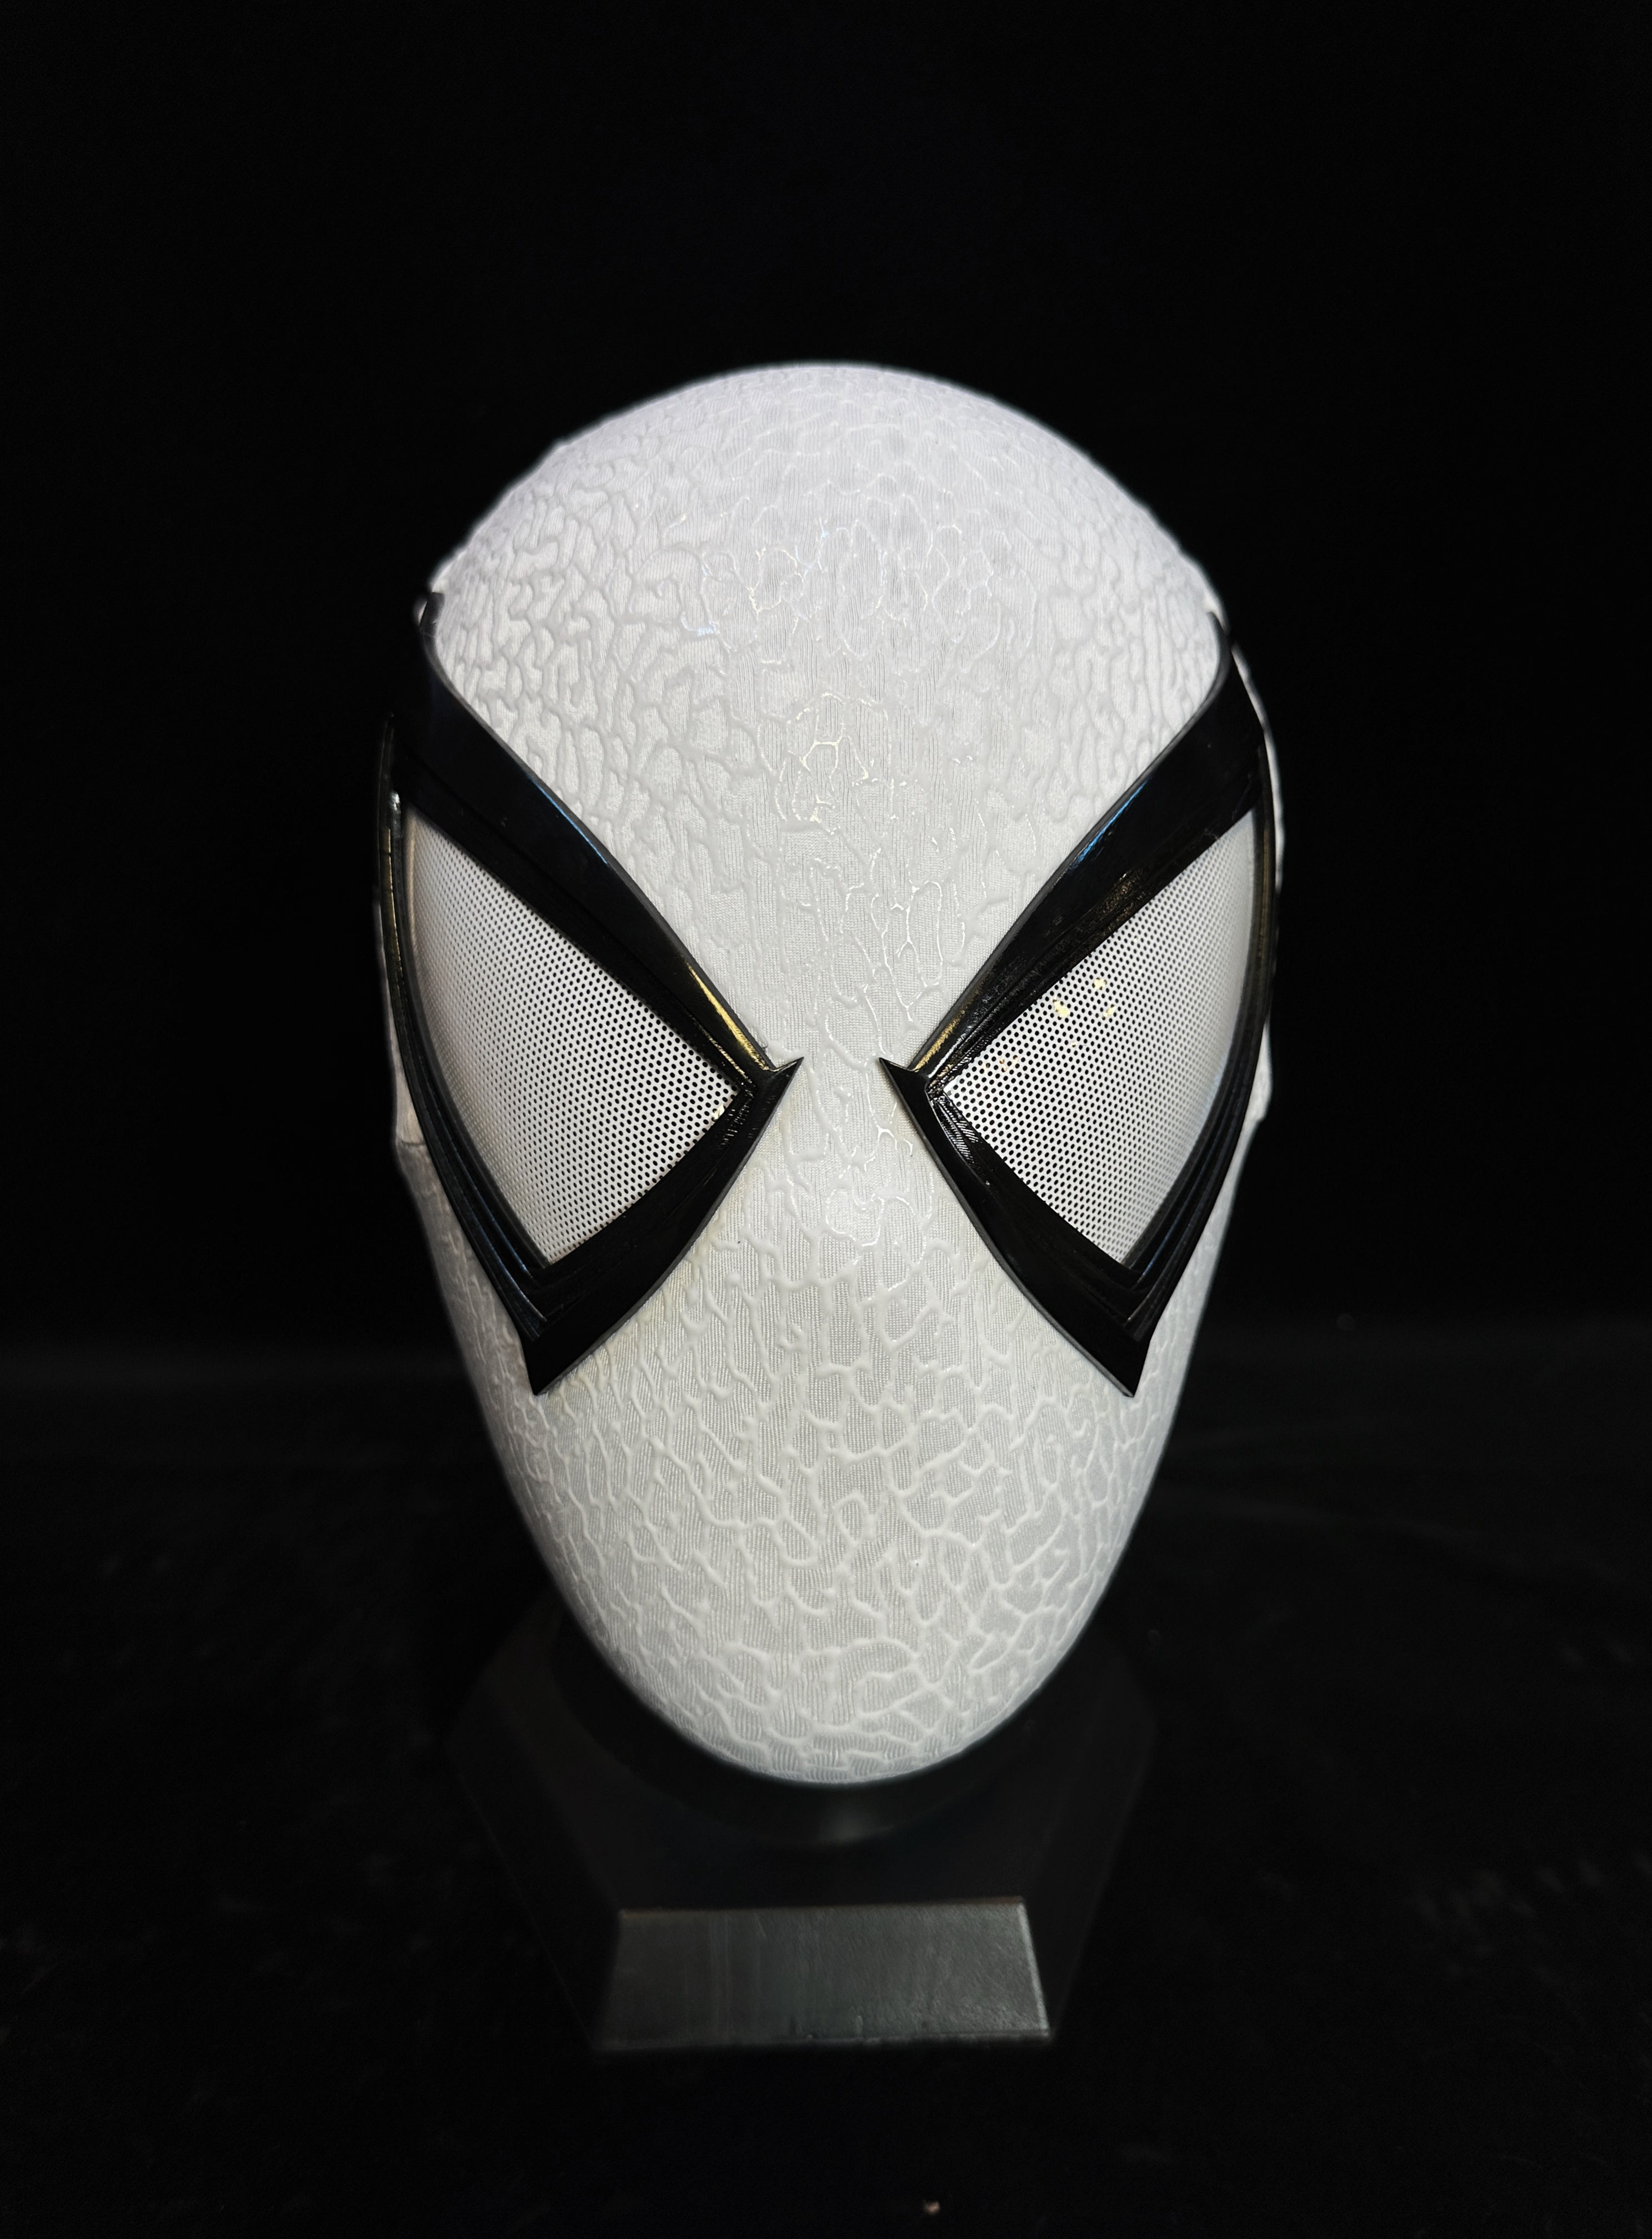 PS5 Anti Venom Spidey Mask with Faceshell and Lenses Wearable Video Game Prop Replica